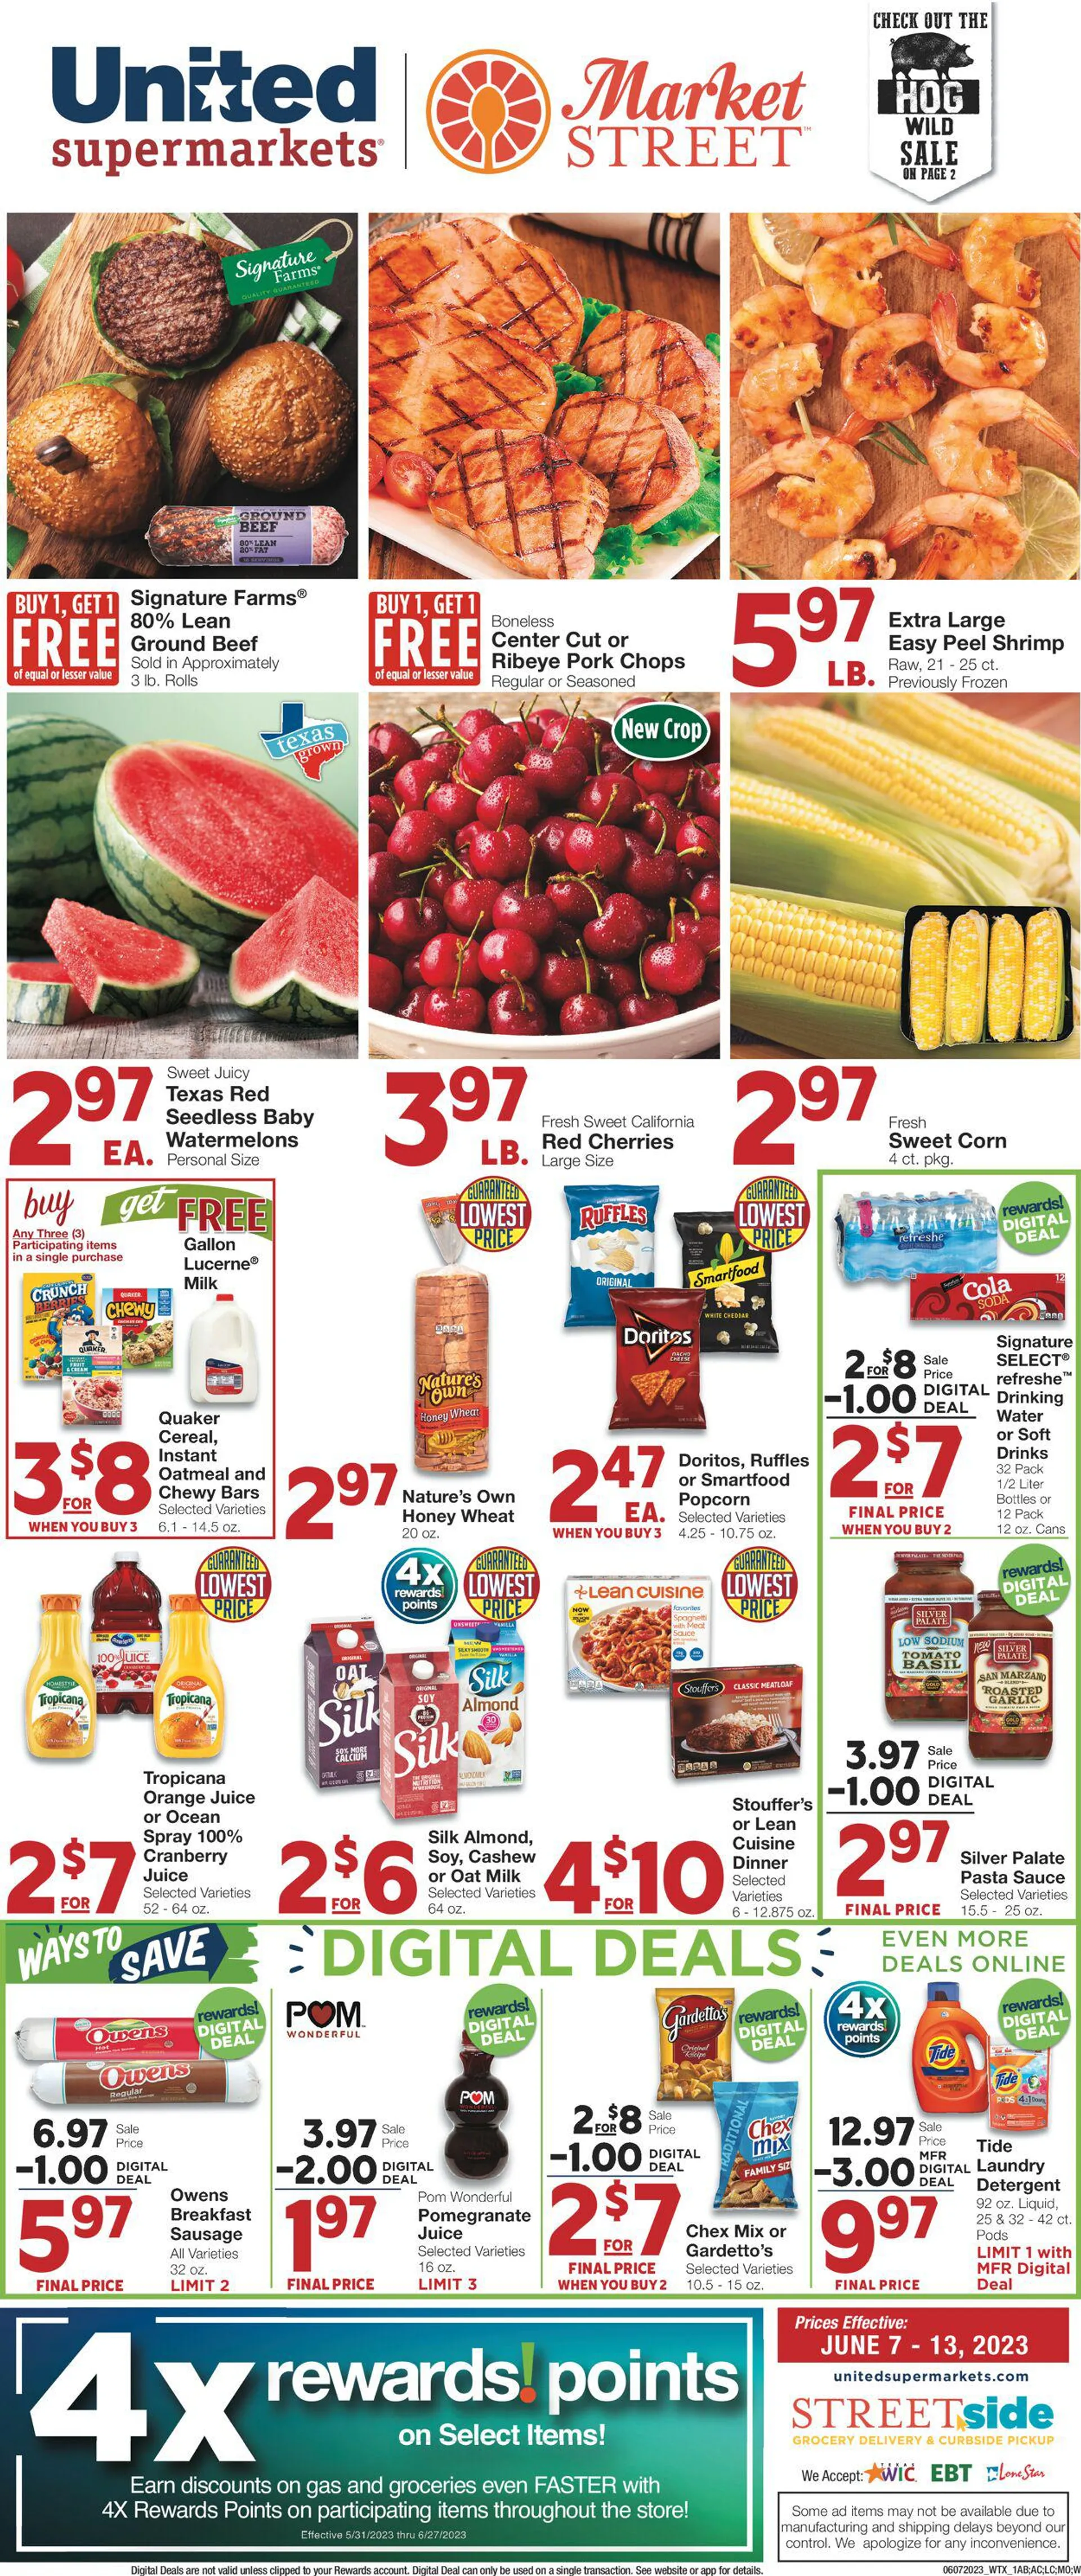 United Supermarkets Current weekly ad - 1